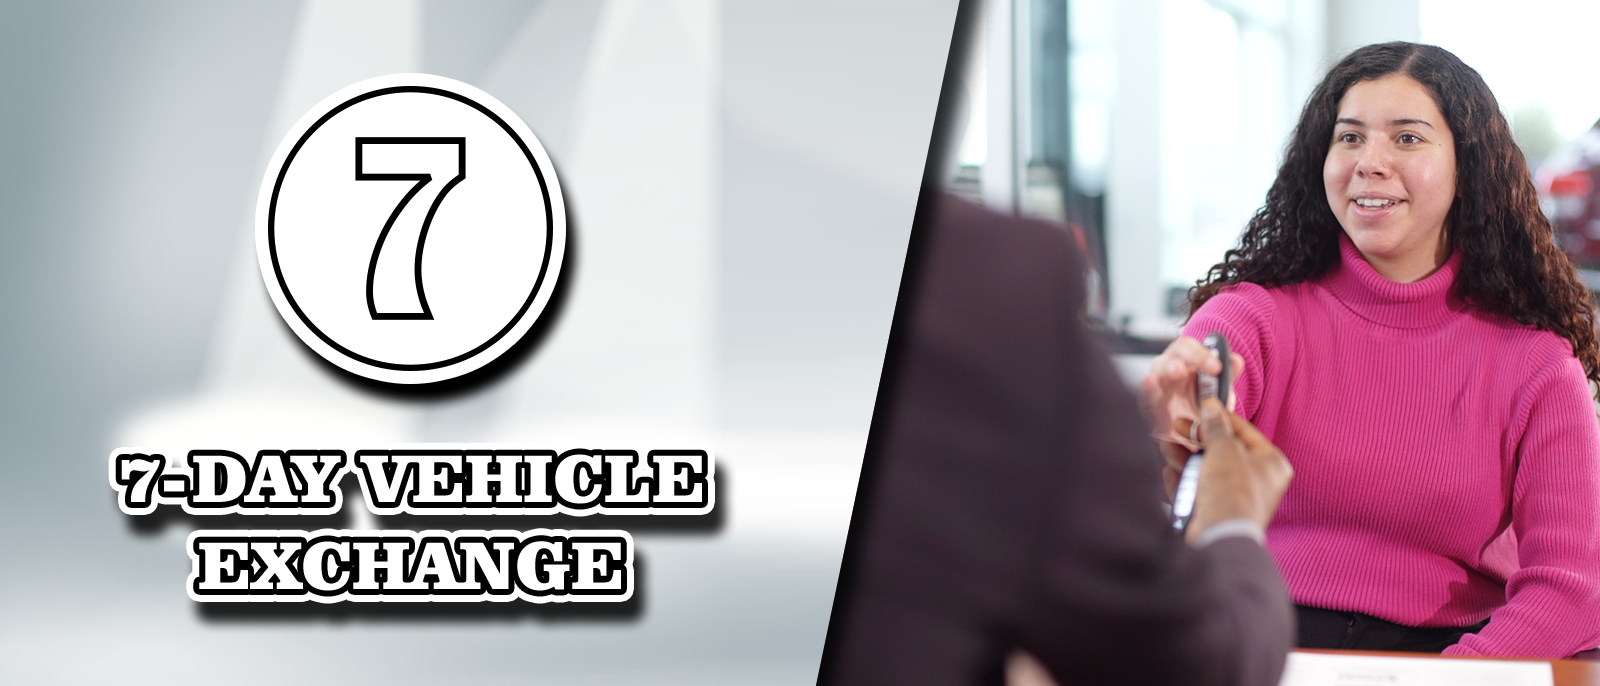 7-Day Vehicle Exchange at Clay Cooley Chrysler Jeep Dodge Ram in Irving TX